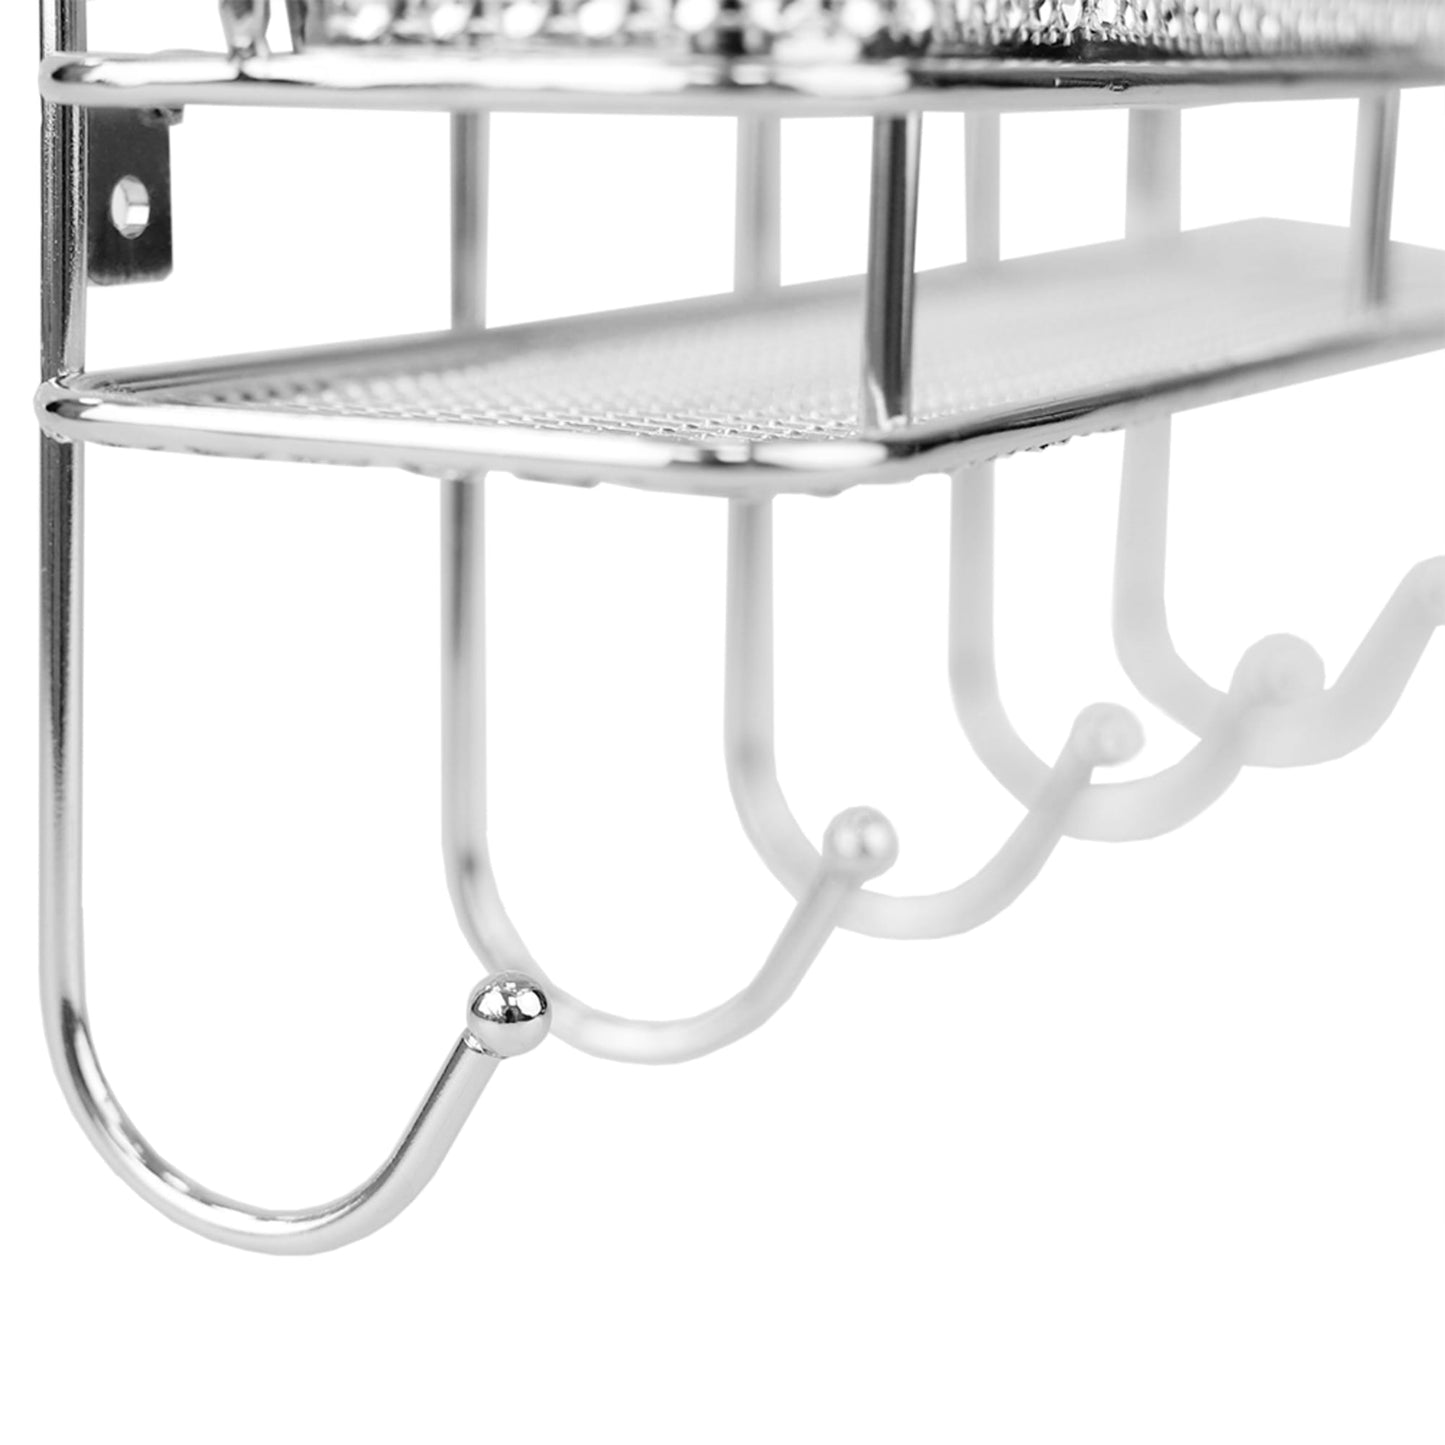 Pave Steel Wall Mount Letter Rack Organizer with Key Hooks, Chrome